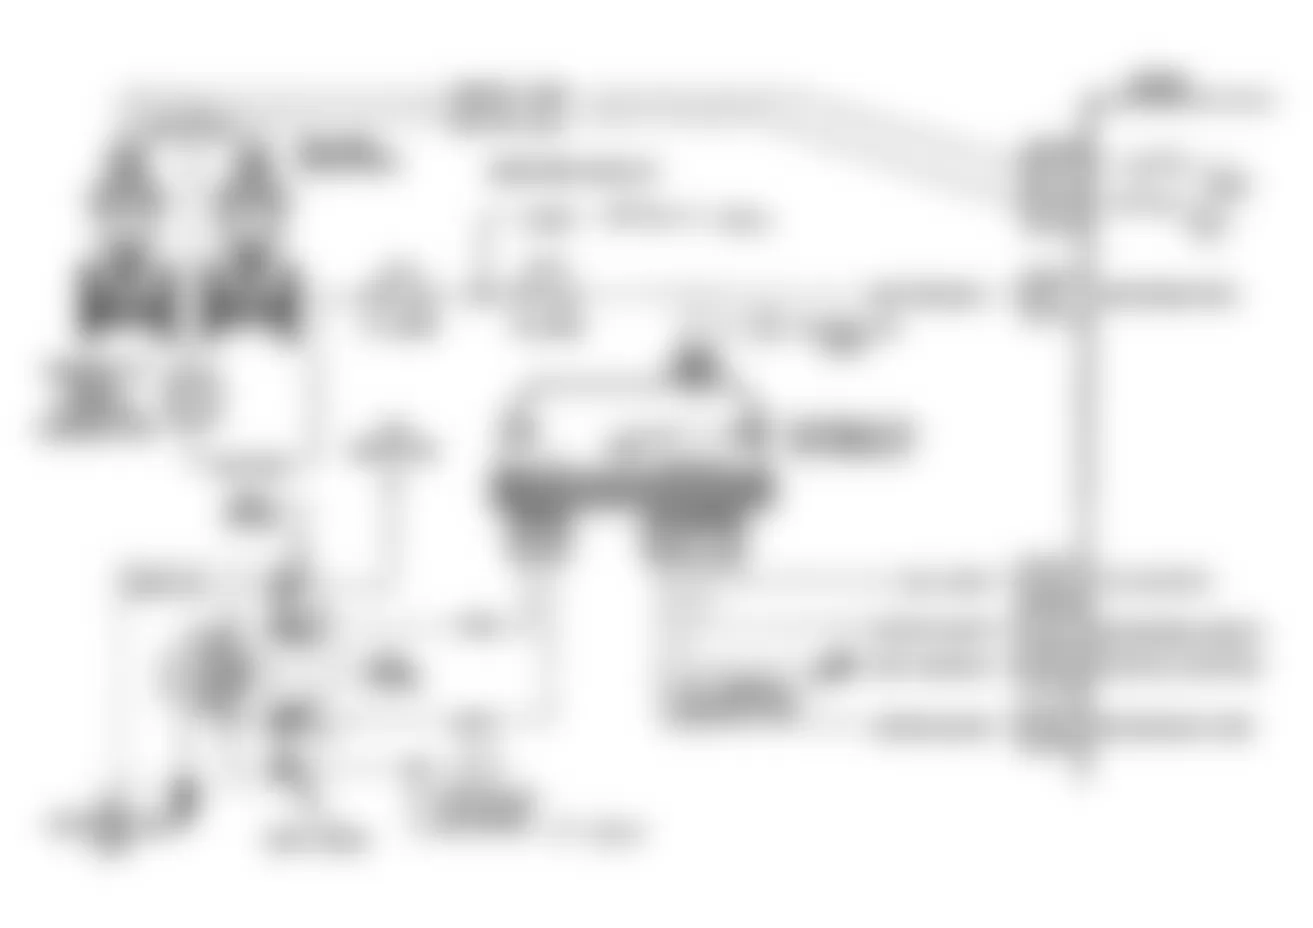 Buick Roadmaster Limited 1992 - Component Locations -  Code 42, Schematic, EST Ckt Open or Grounded, B Body